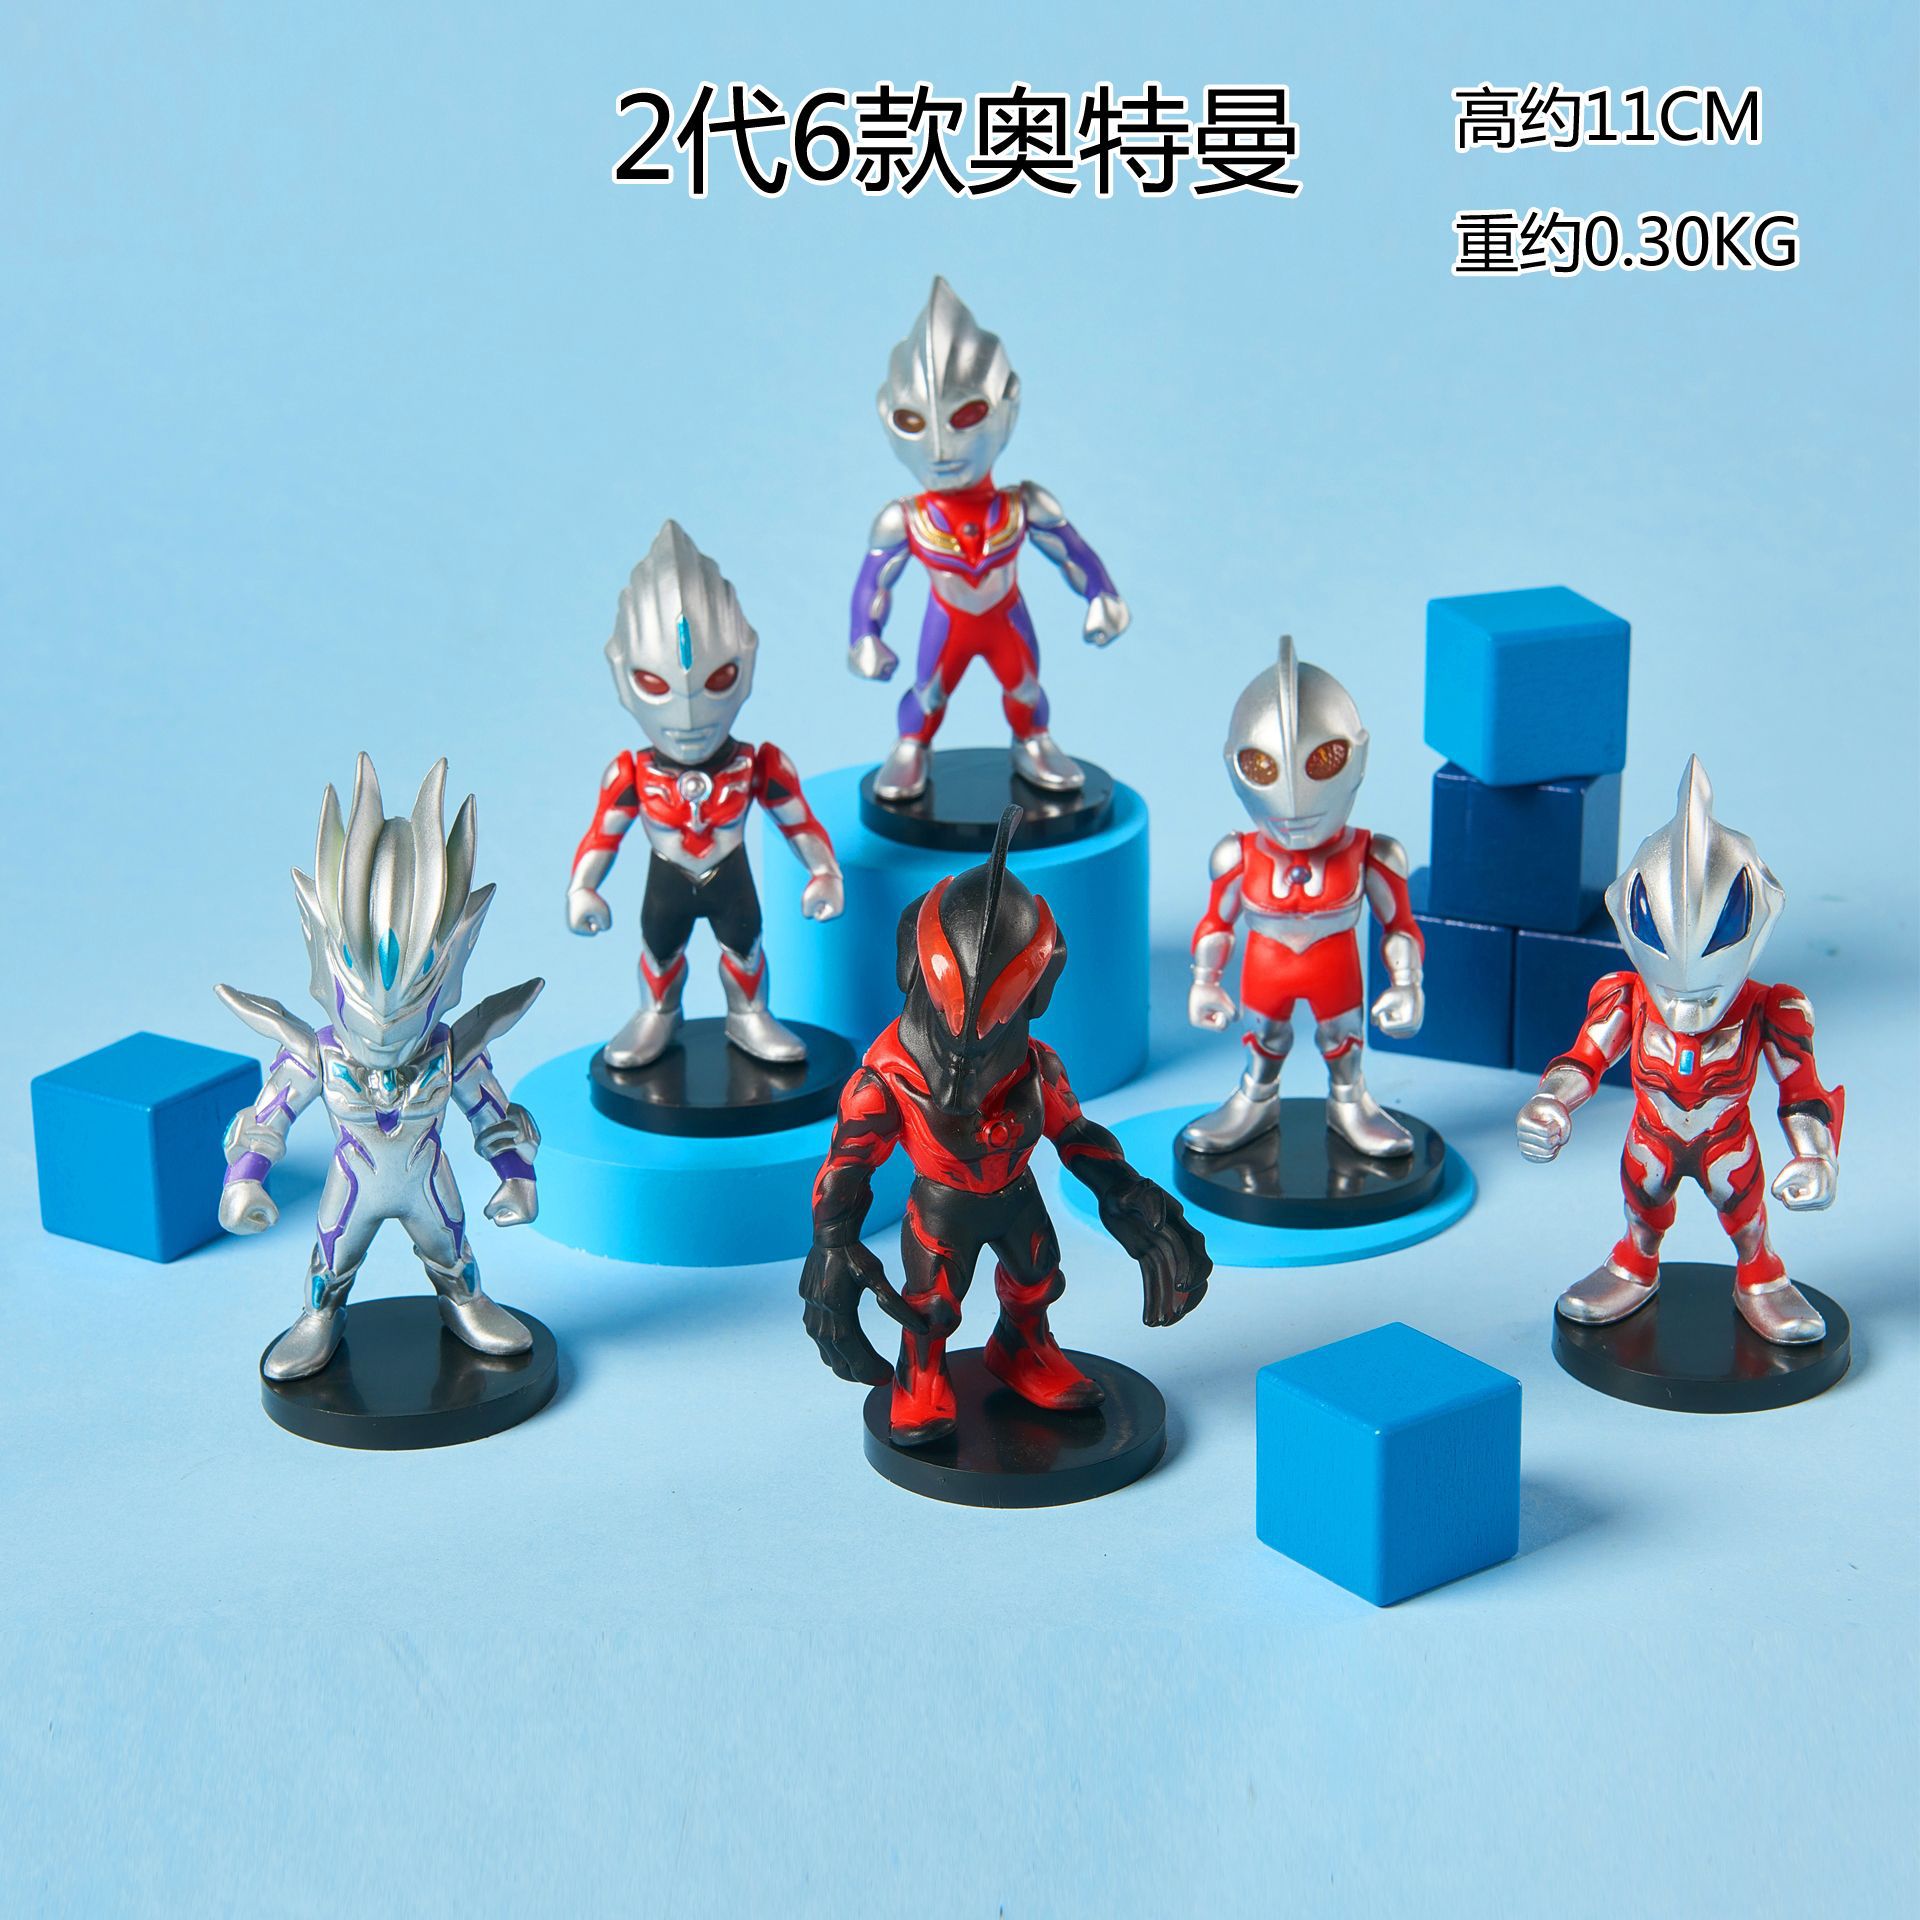 Ultraman Toy Superman Hand-Made Wholesale Selodiga Capsule Toy Doll Cake Ornaments Children